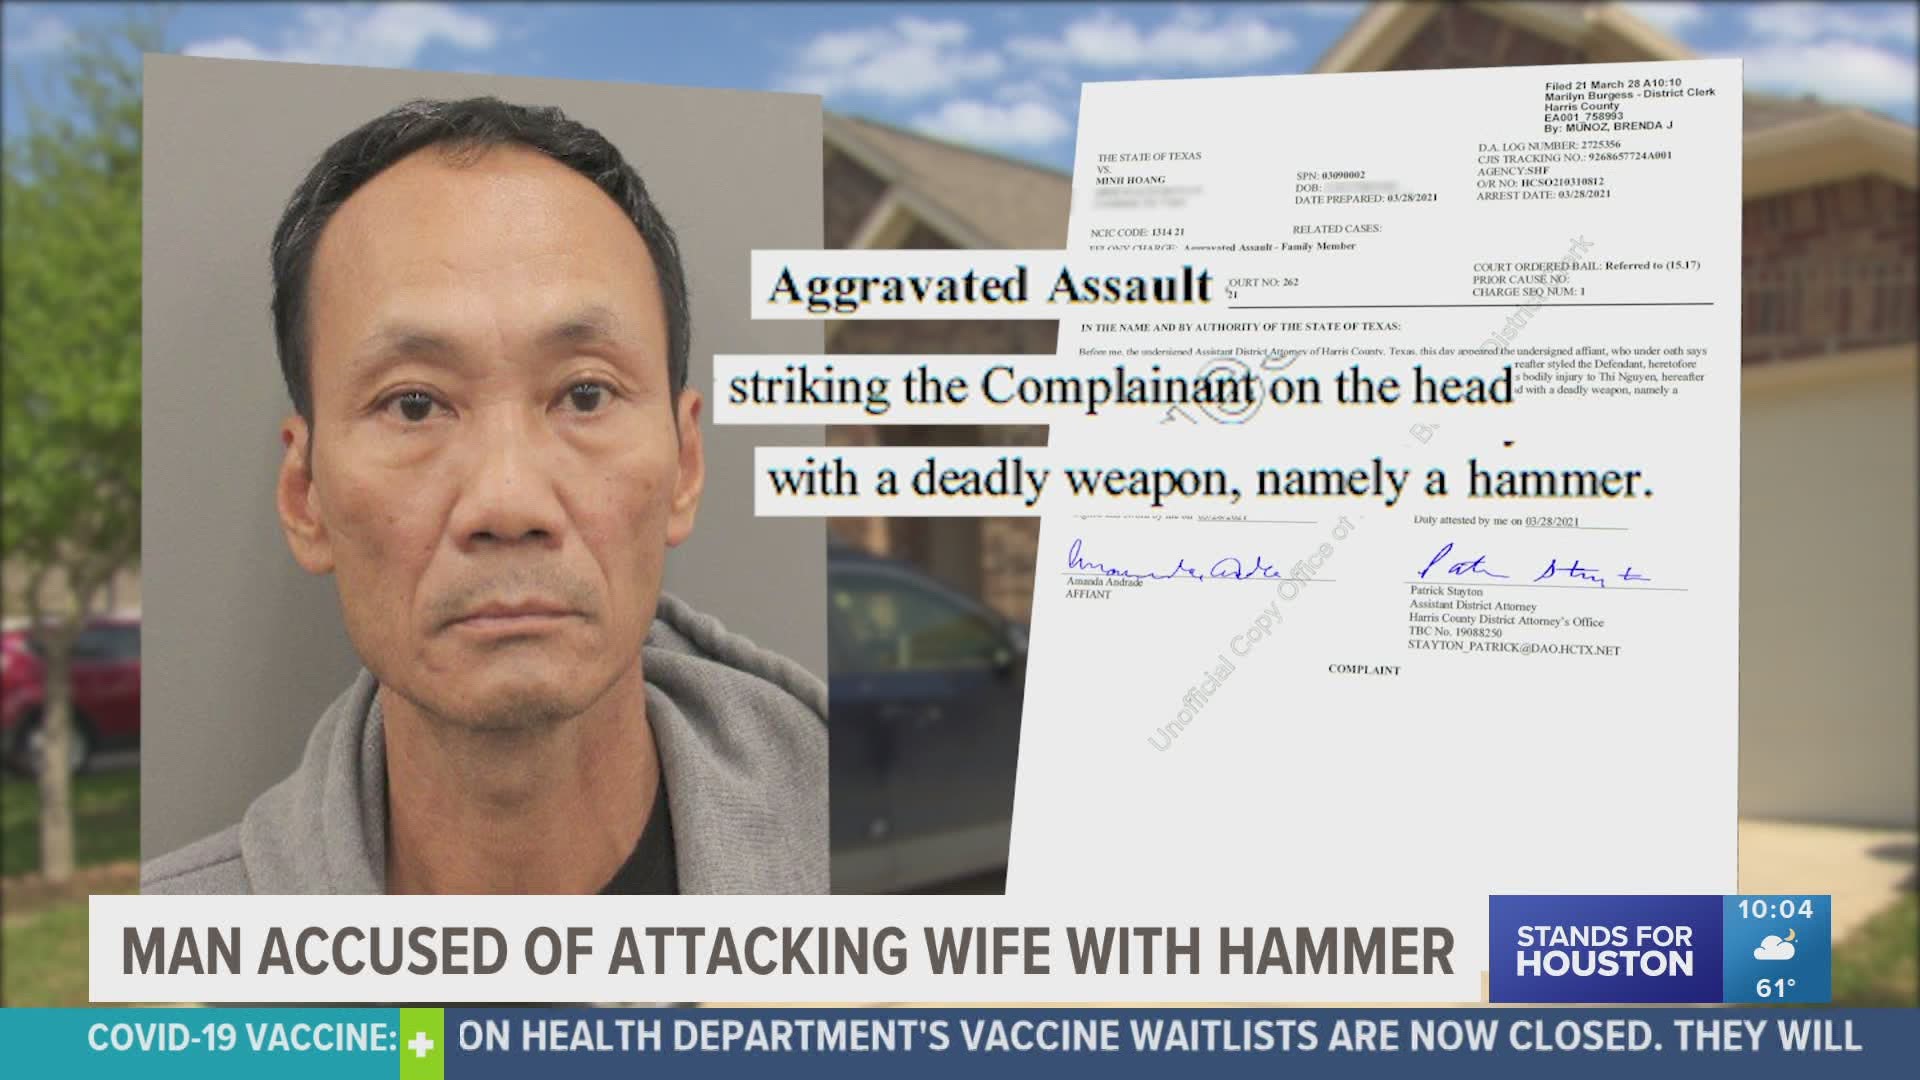 Minh Hoang has been arrested and charged with aggravated assault after investigators said he beat his wife with a hammer last weekend.